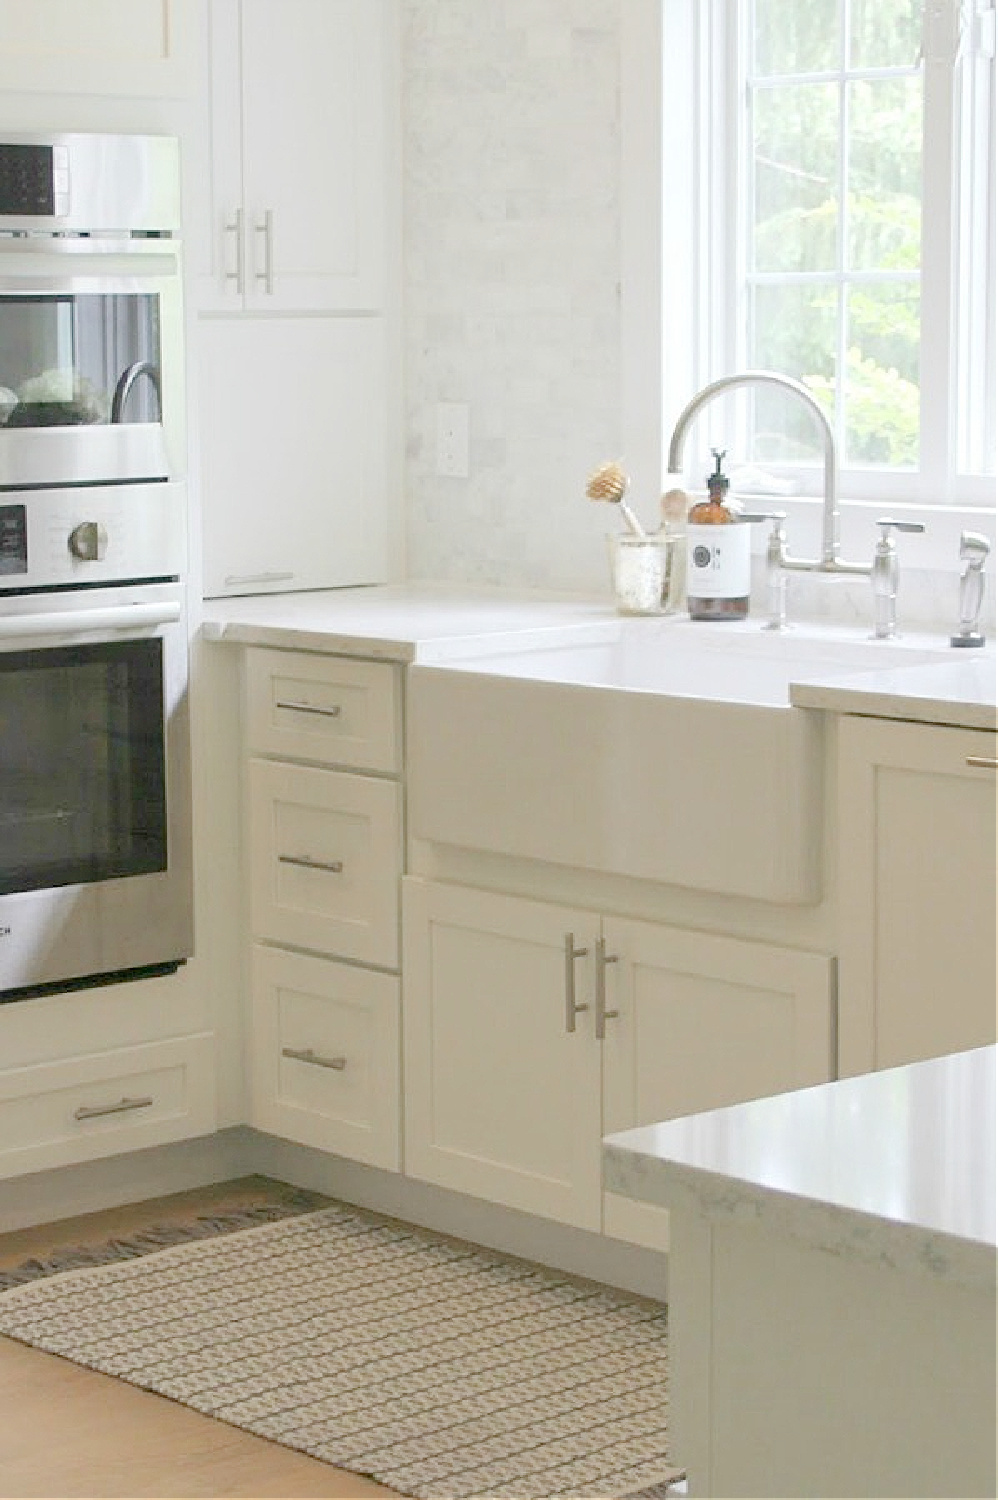 White Shaker classic kitchen with fireclay farm sink, Bosch double ovens, Viatera Minuet quartz counters and polished Venatino marble subway backsplash tile - Hello Lovely Studio.